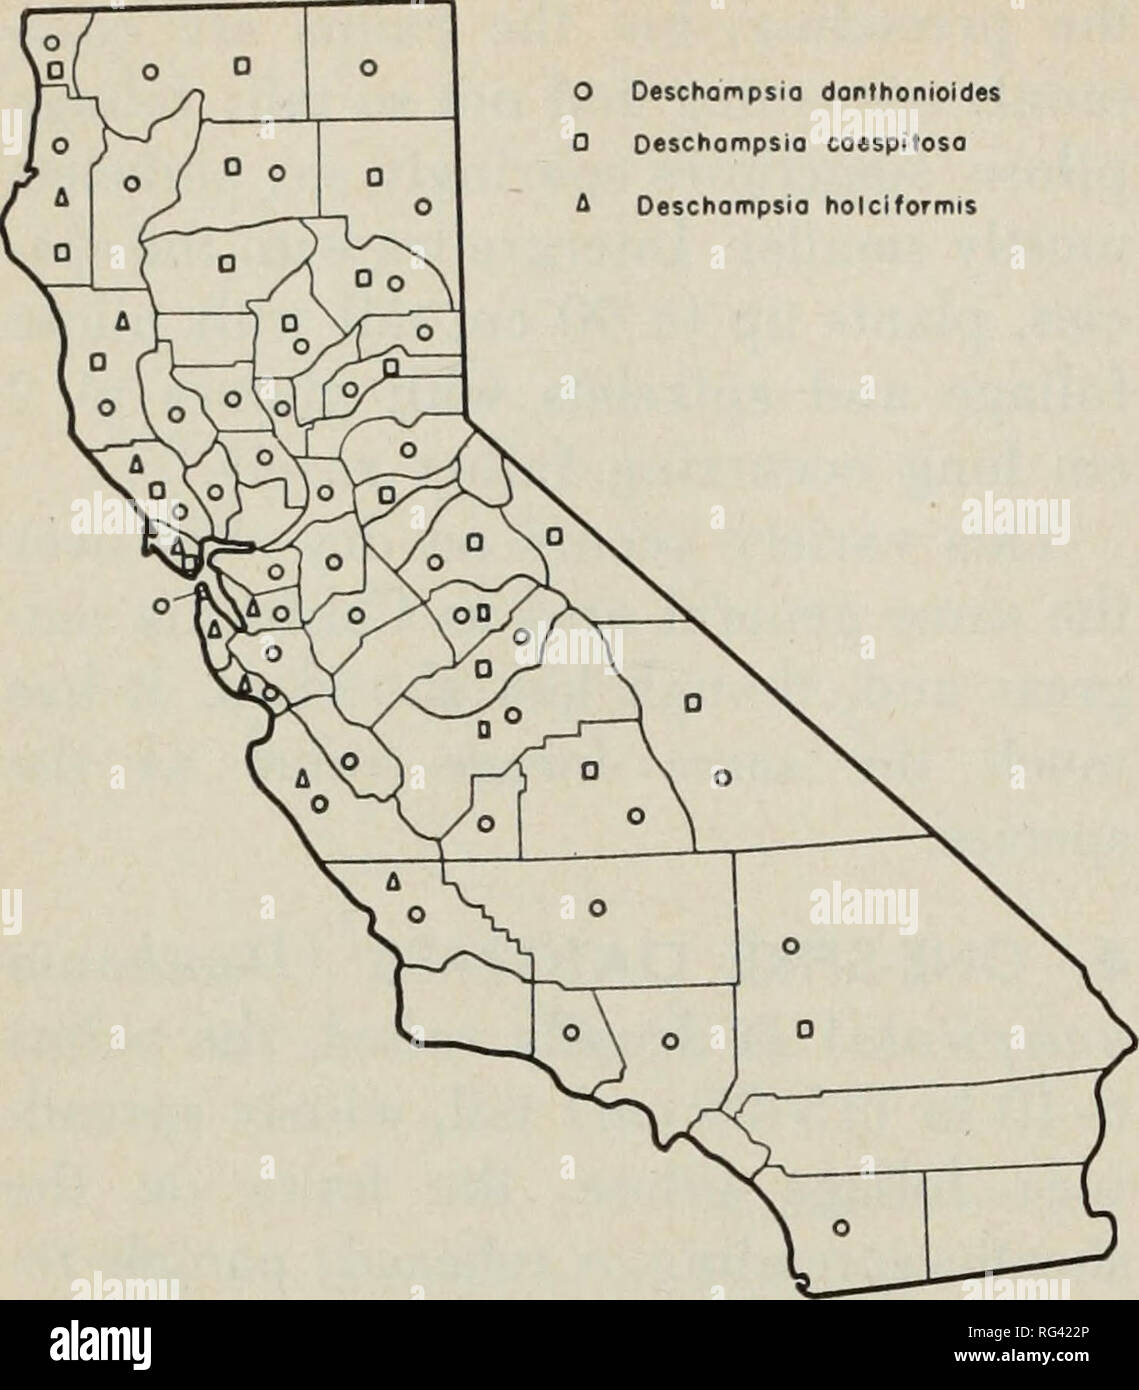 . California grasslands and range forage grasses. Grasses; Forage plants. Deschompsia danthonioides Deschompsio caespitosa Deschampsio holciformis. Fig. 68. Distribution of hairgrasses (Deschampsia spp.) Four hairgrasses are found on Cali- fornia range lands. Of the three species important for forage, two are perennials and one an annual. (Fig. 68.) Key to Species Plants annual, awns bent 3. D. danthonioides Plants perennial; awns nearly straight Panicle open 1. D. caespitosa Panicle narrow, dense 2. D. holciformis 1. TUFTED HAIRGRASS (Deschampsia caespitosa) grows in dense tufts, 1%- S1/^ ft  Stock Photo